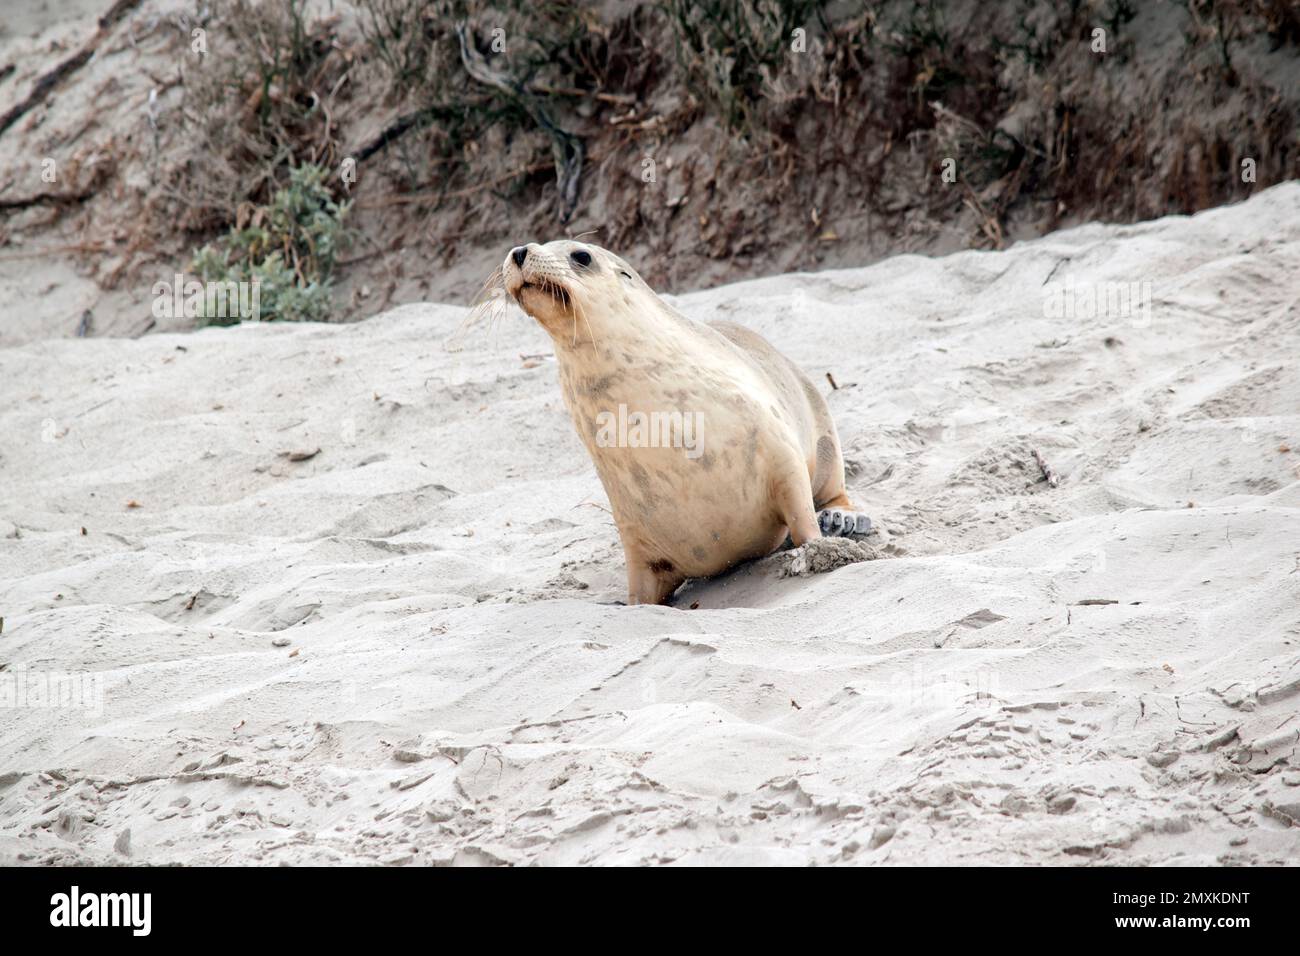 the sea lion pup is wandering up and down the beach looking for its mother Stock Photo